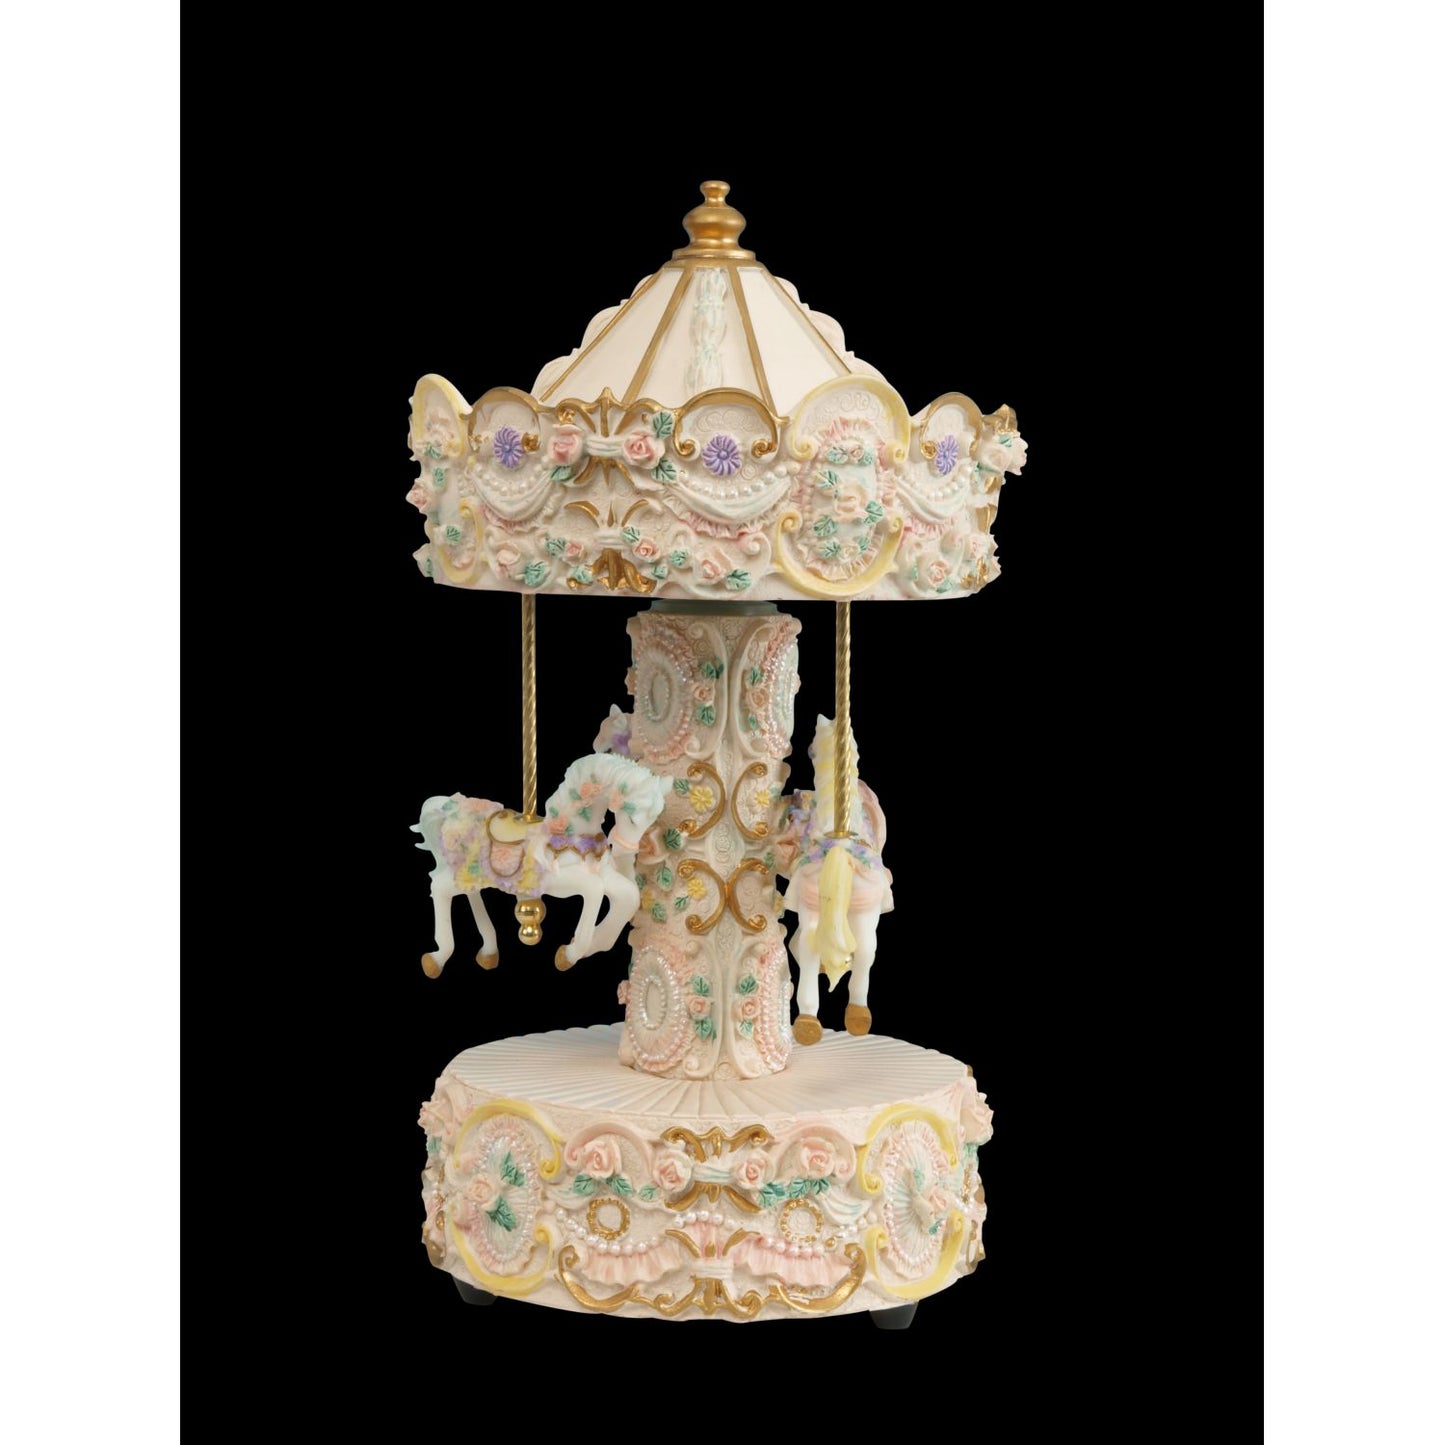 Musicbox Kingdom 9.1" Beige Carousel Turns To The Melody “For Elise”